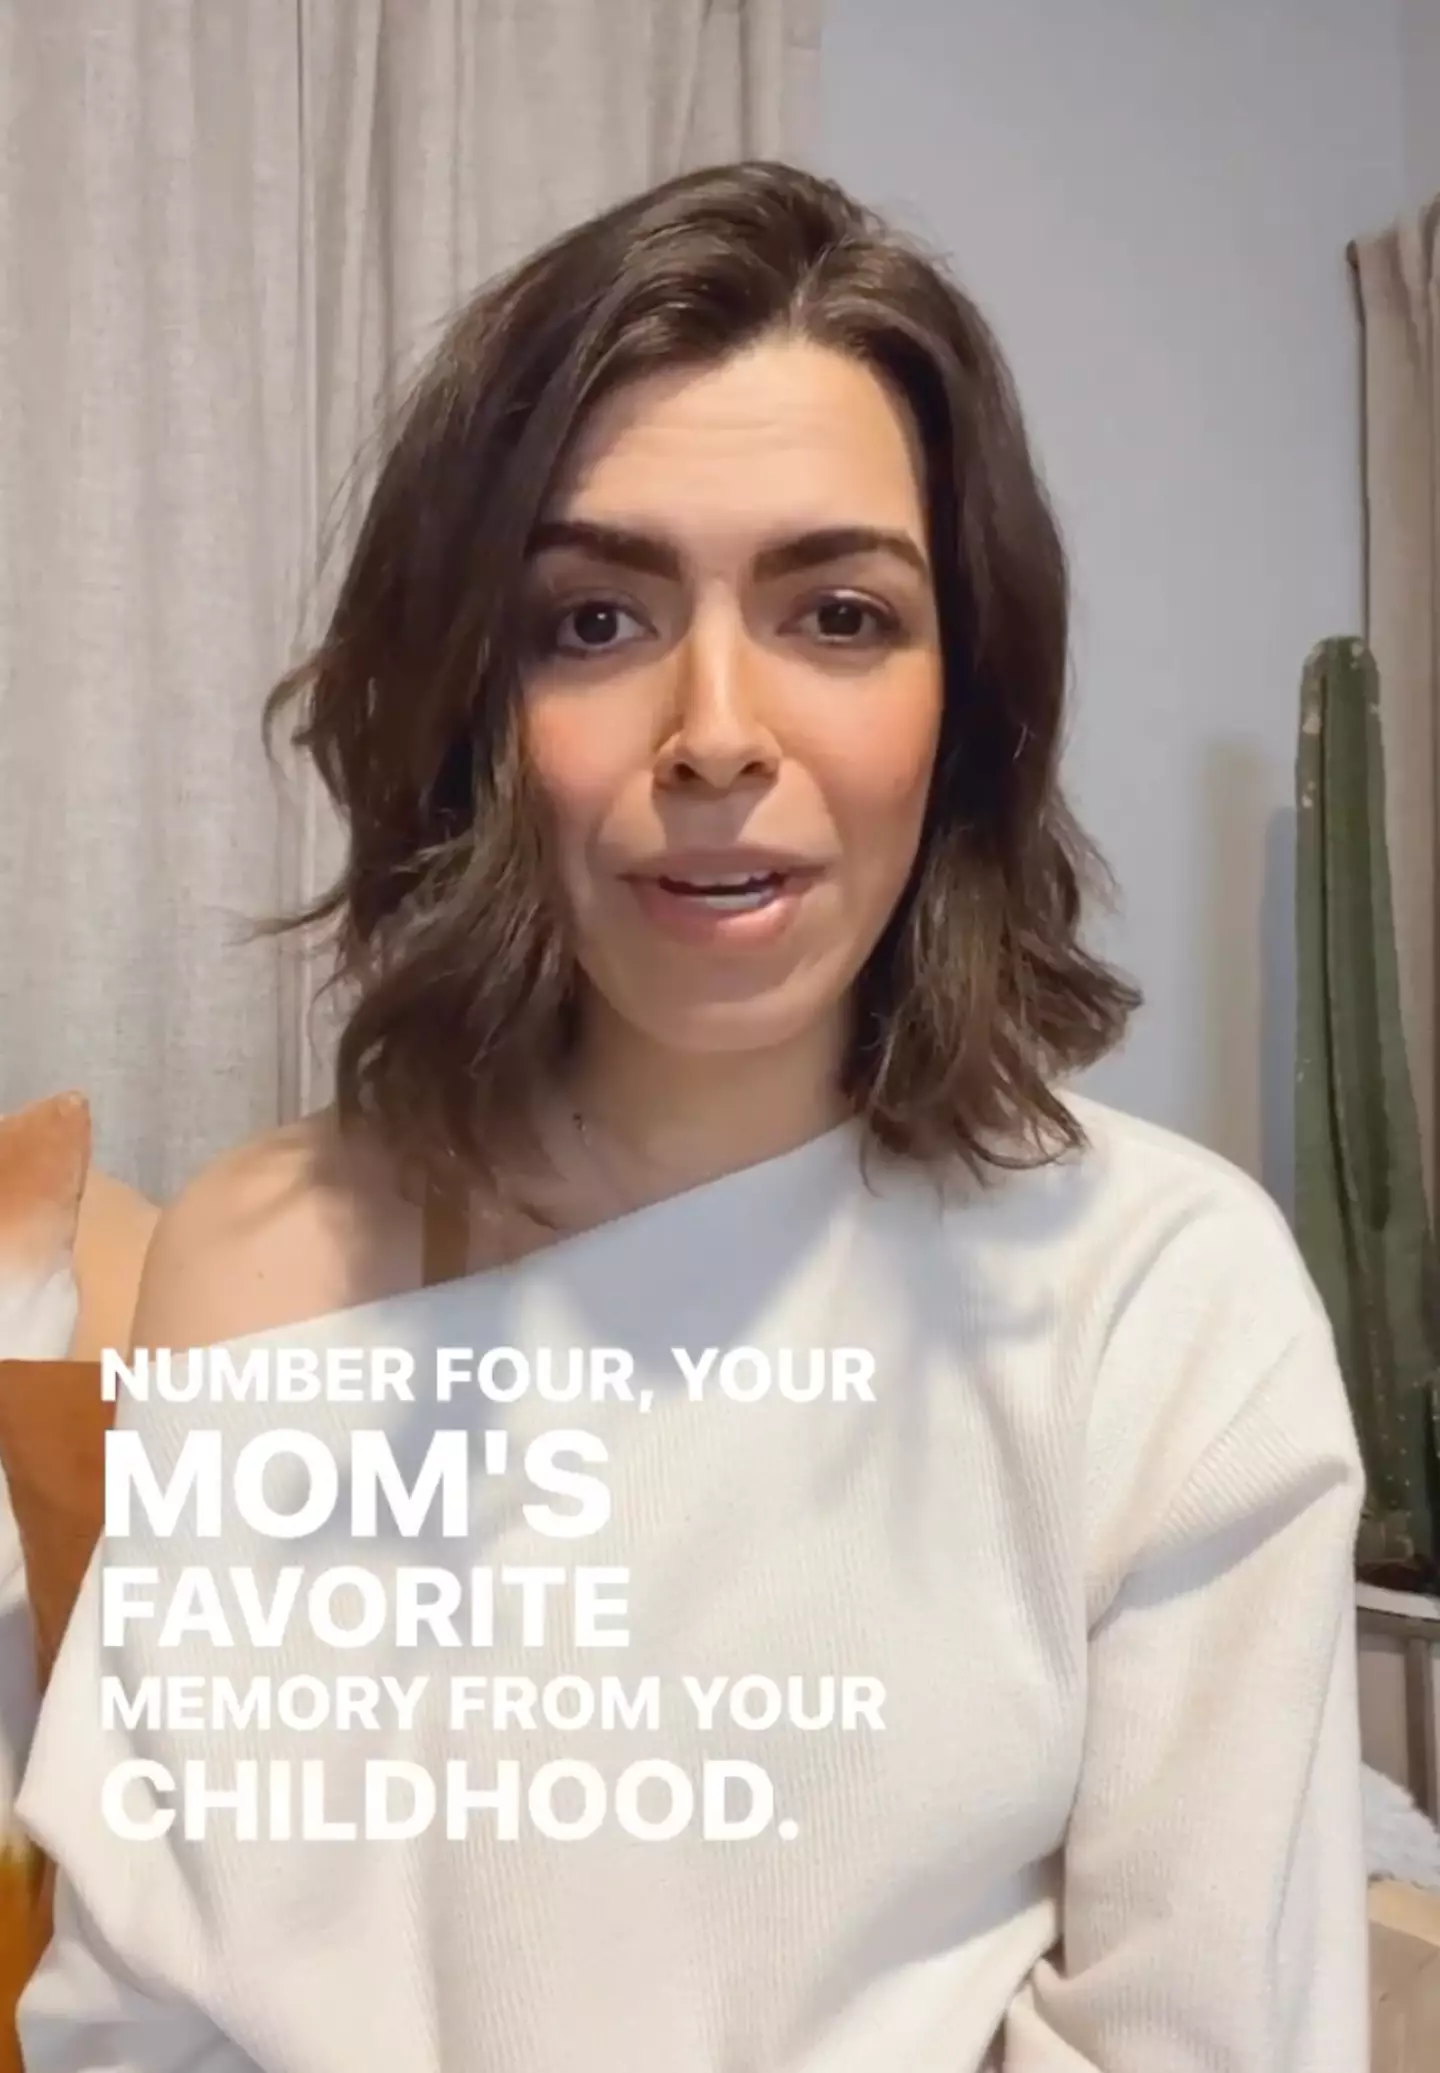 Courtney believes you should ask your parents for their favourite memory from your childhood.